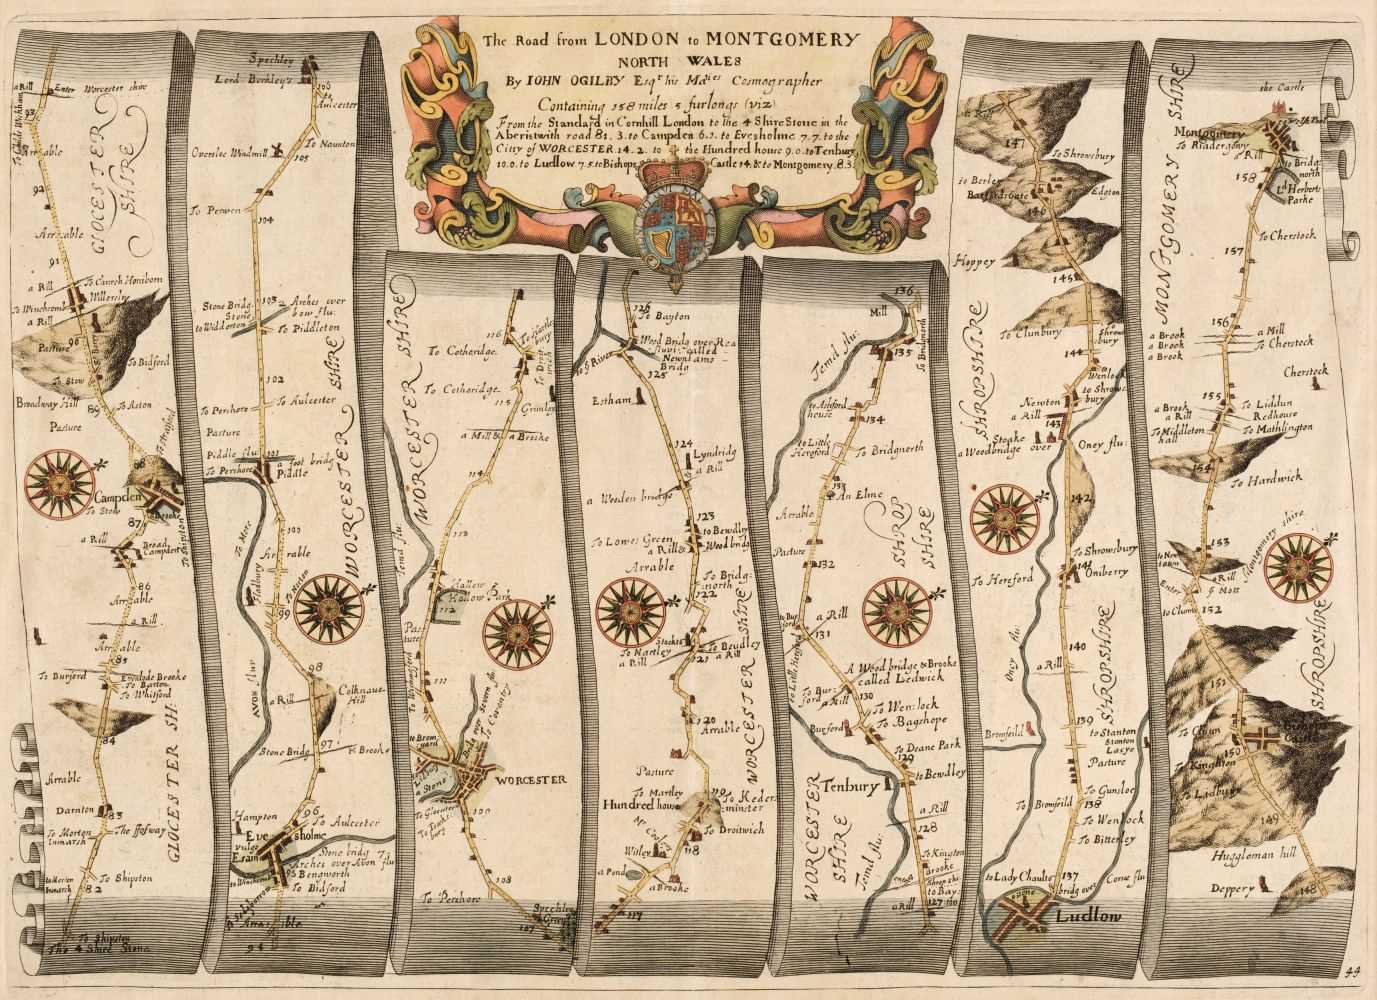 135 - Ogilby (John). Six strip road maps, 1676 or later